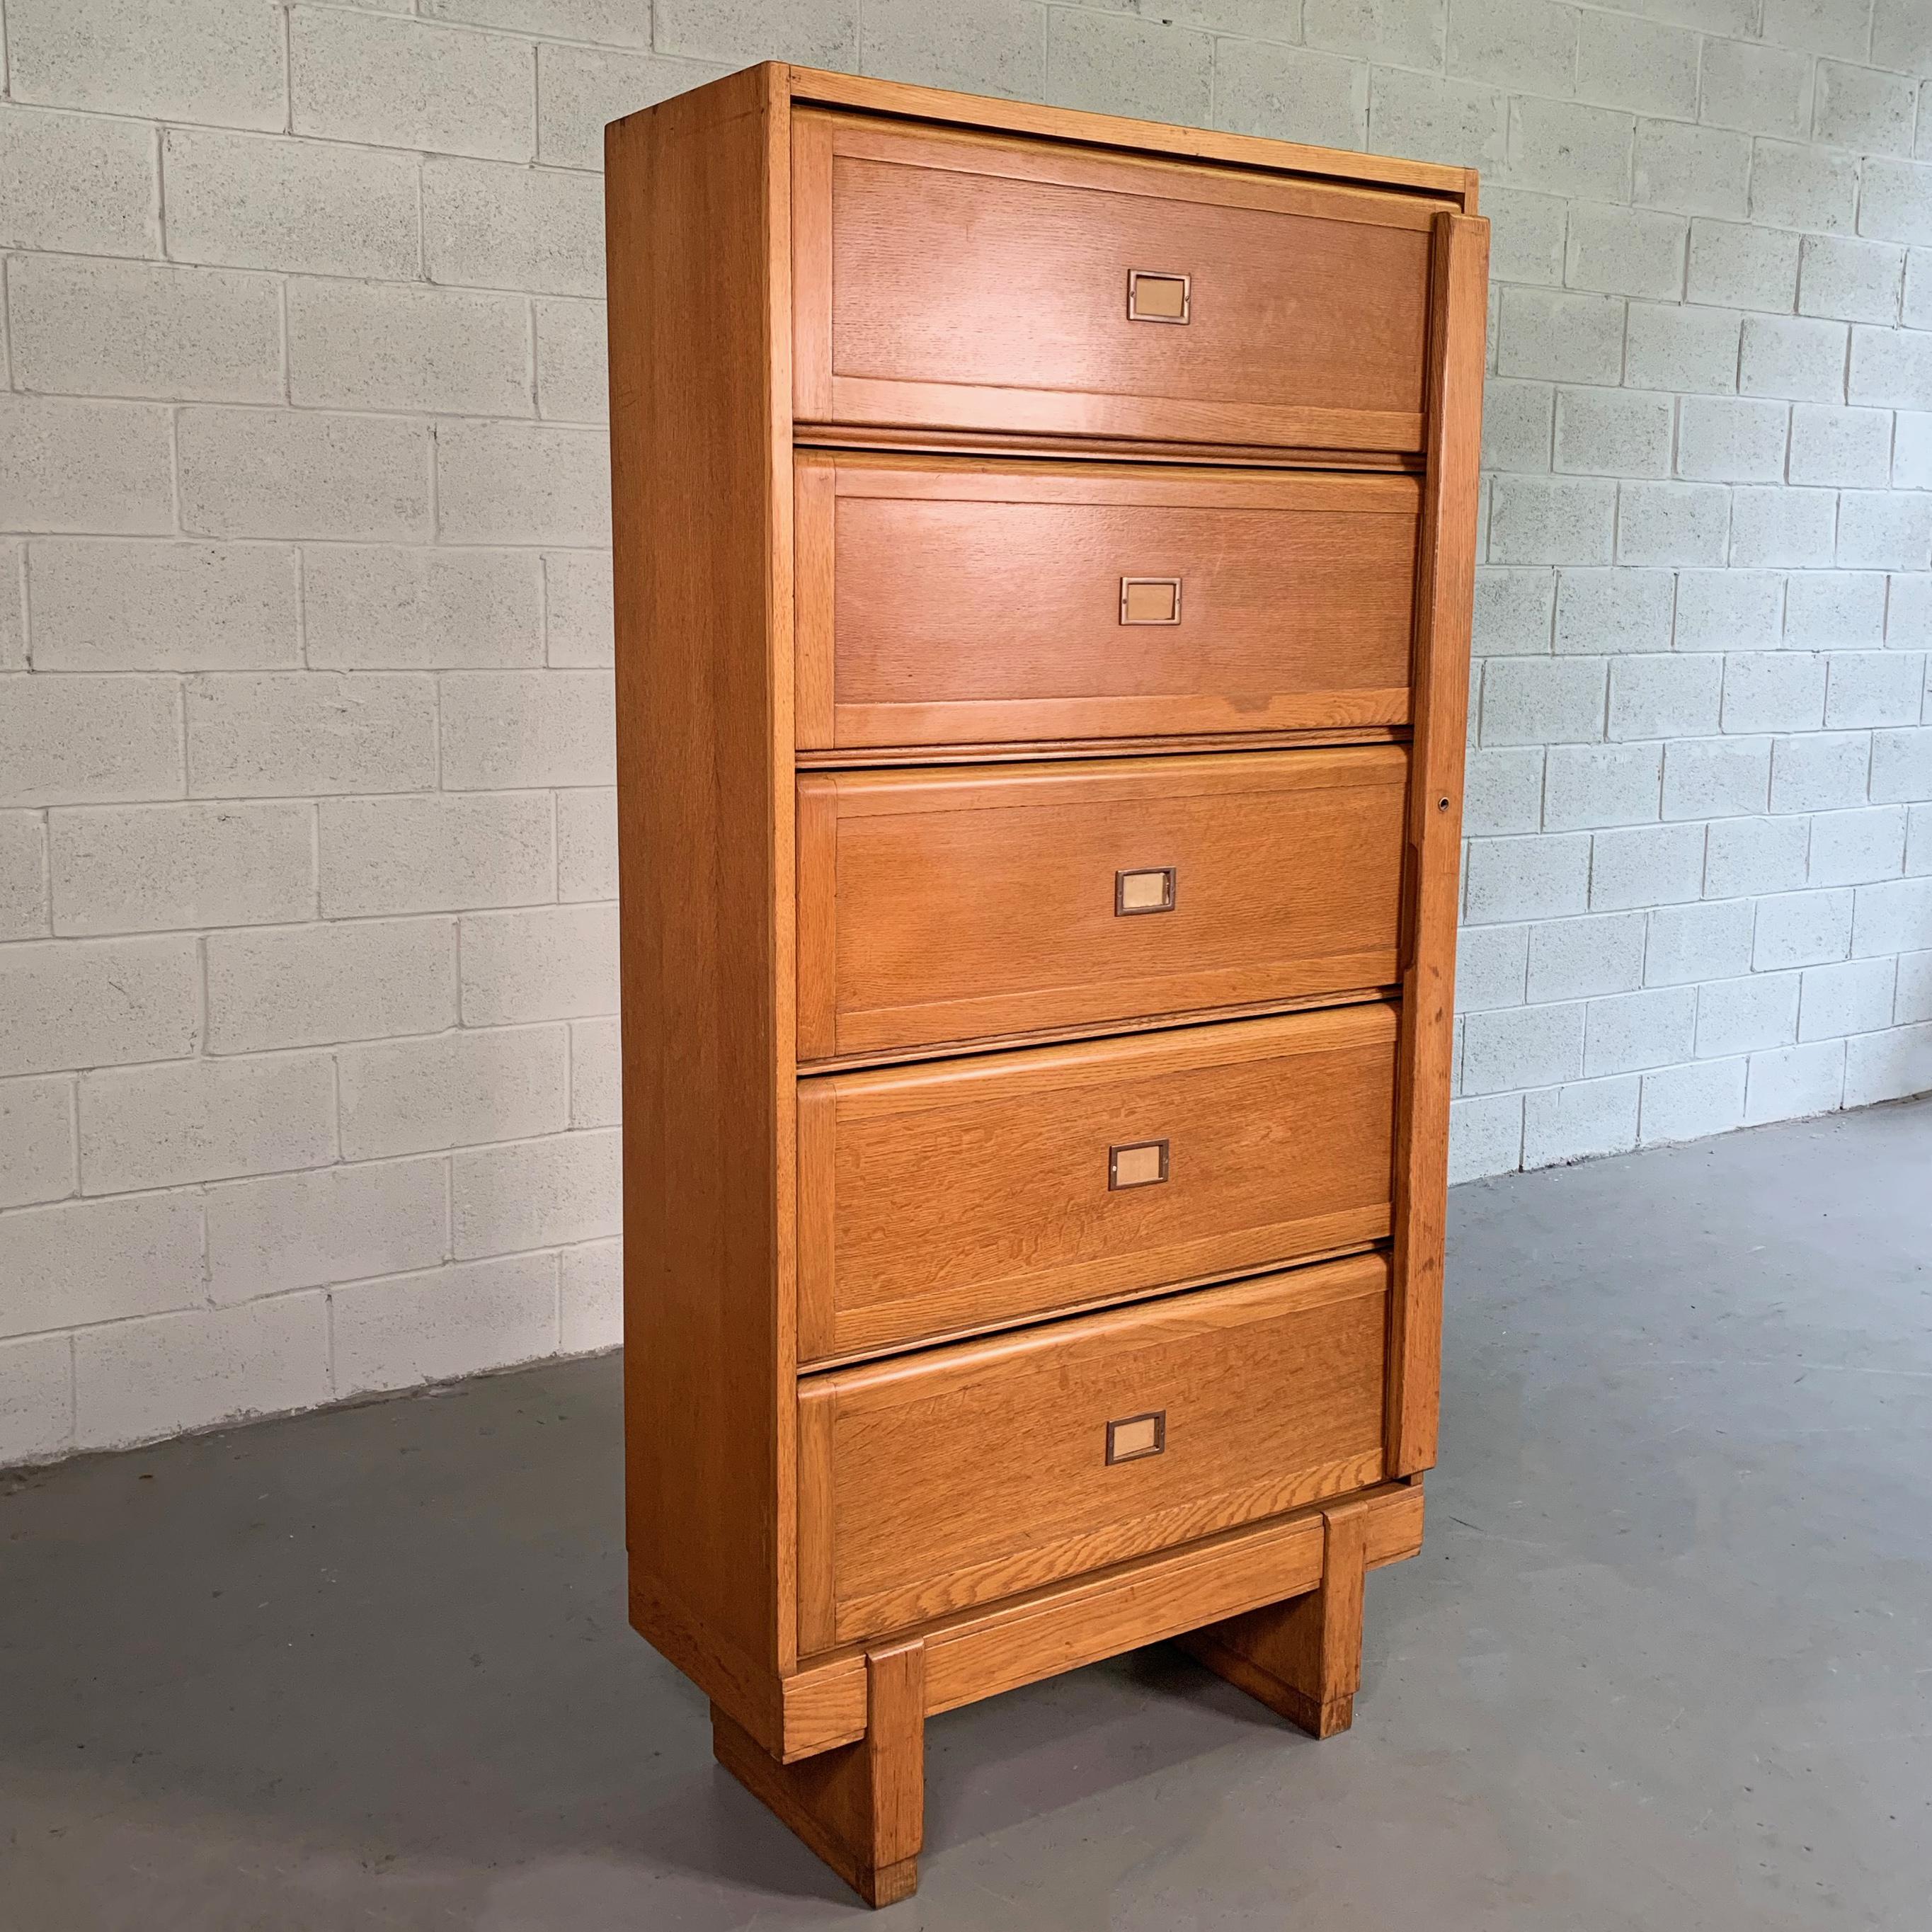 Wonderfully detailed, midcentury, industrial, solid oak, barrister bookcase, document cabinet features 5 divided cabinets with doors that slide up to open with side panel to lock the cabinets when all doors are closed with brass hardware. The drawer